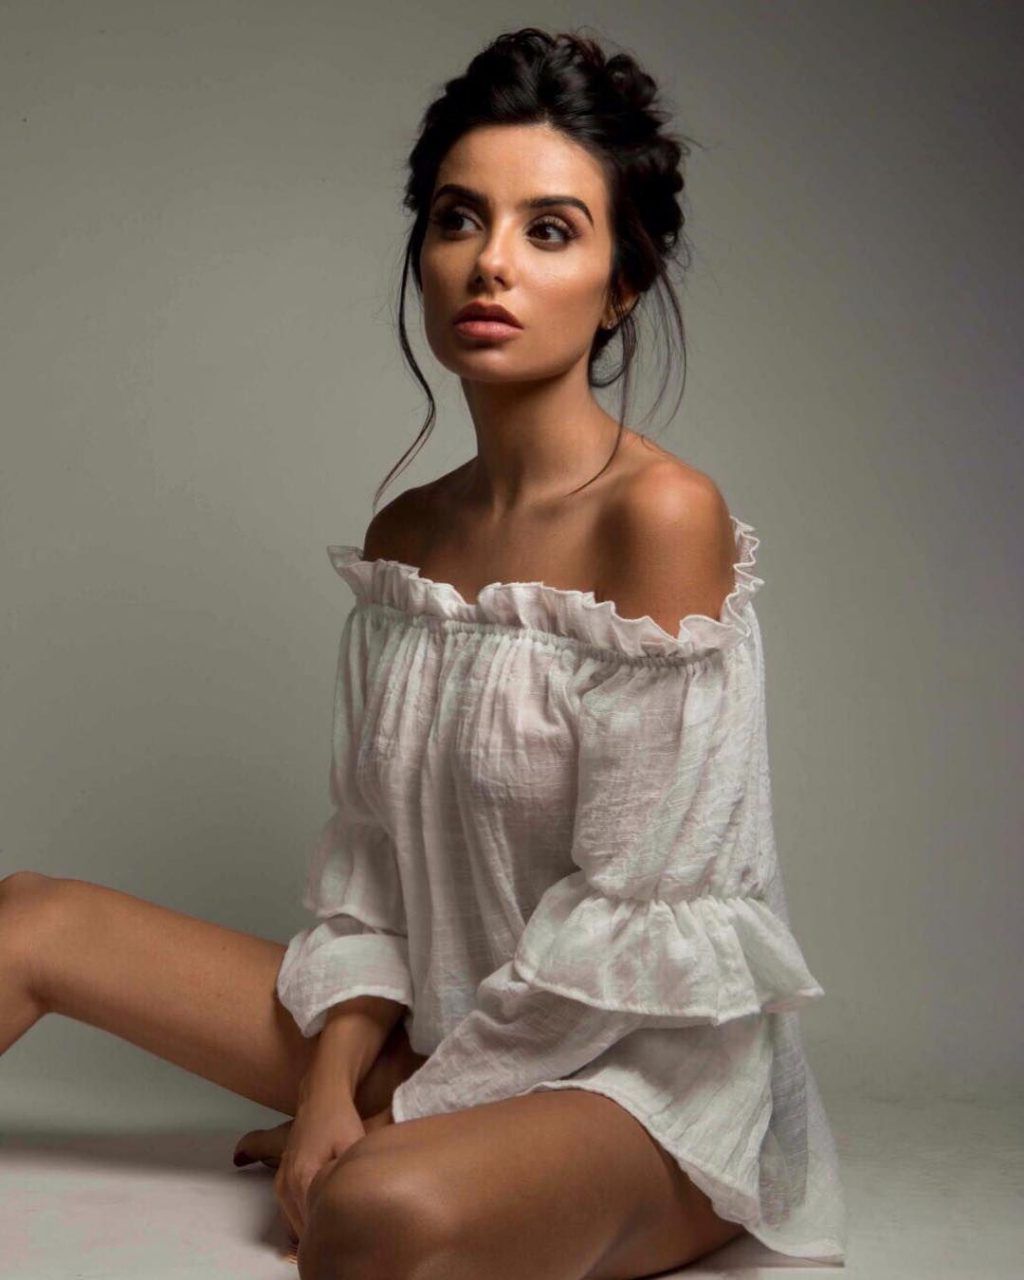 Mikaela hoover the fappening